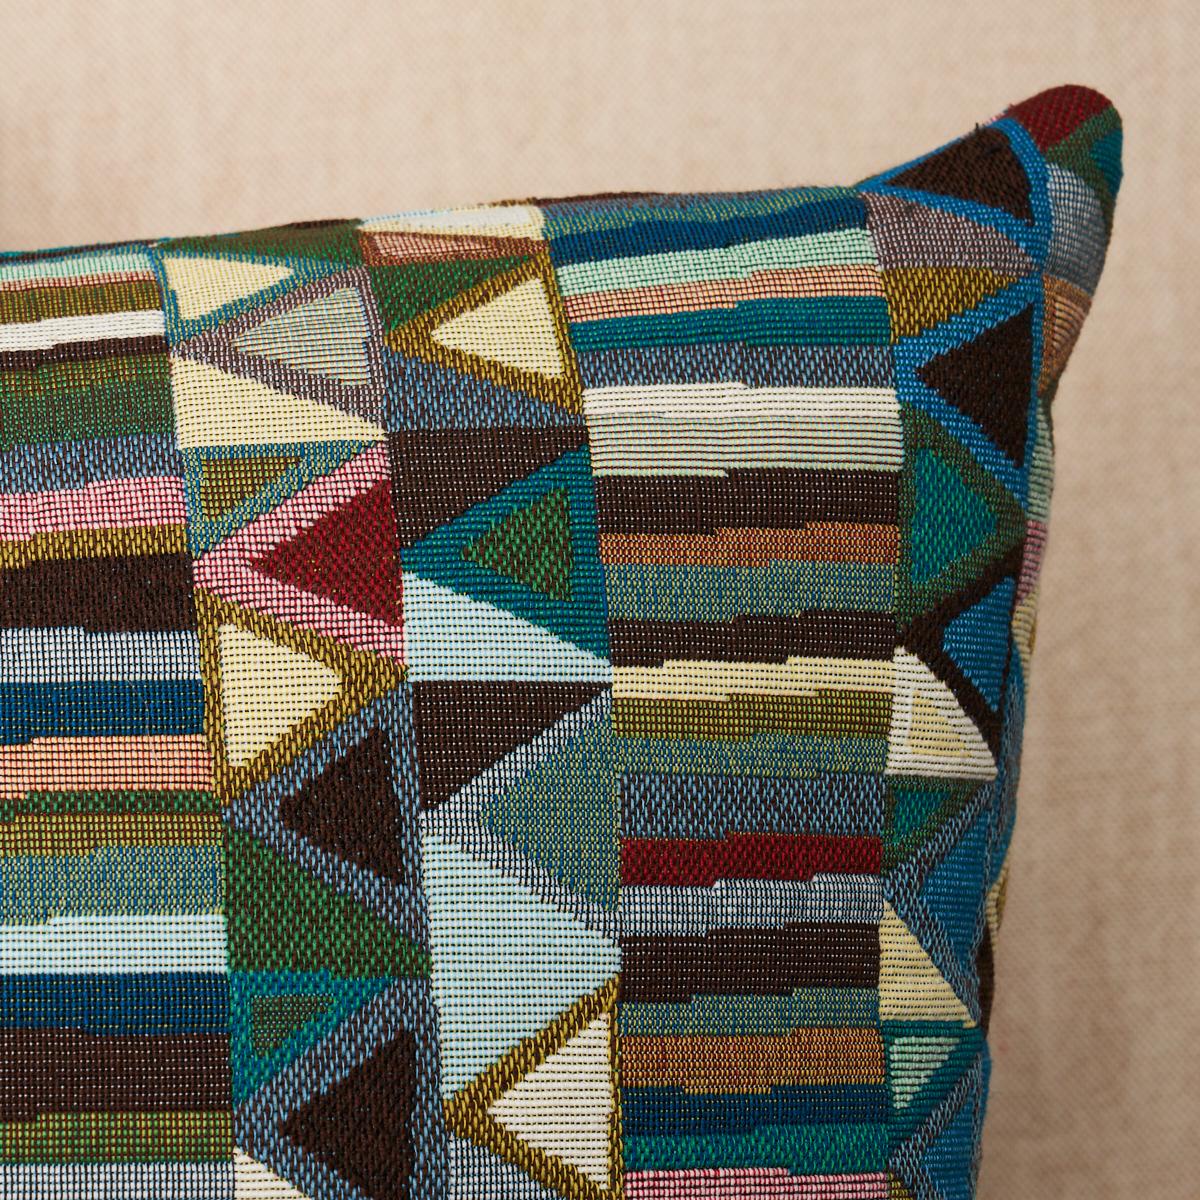 This pillow features Tierra Stripe with a knife edge finish. Inspired by a vintage handwoven blanket, this textural, tonal offset stripe in blue gets its velvety hand from a blend of chunky cotton and linen chenille yarns. Soft yet substantial,